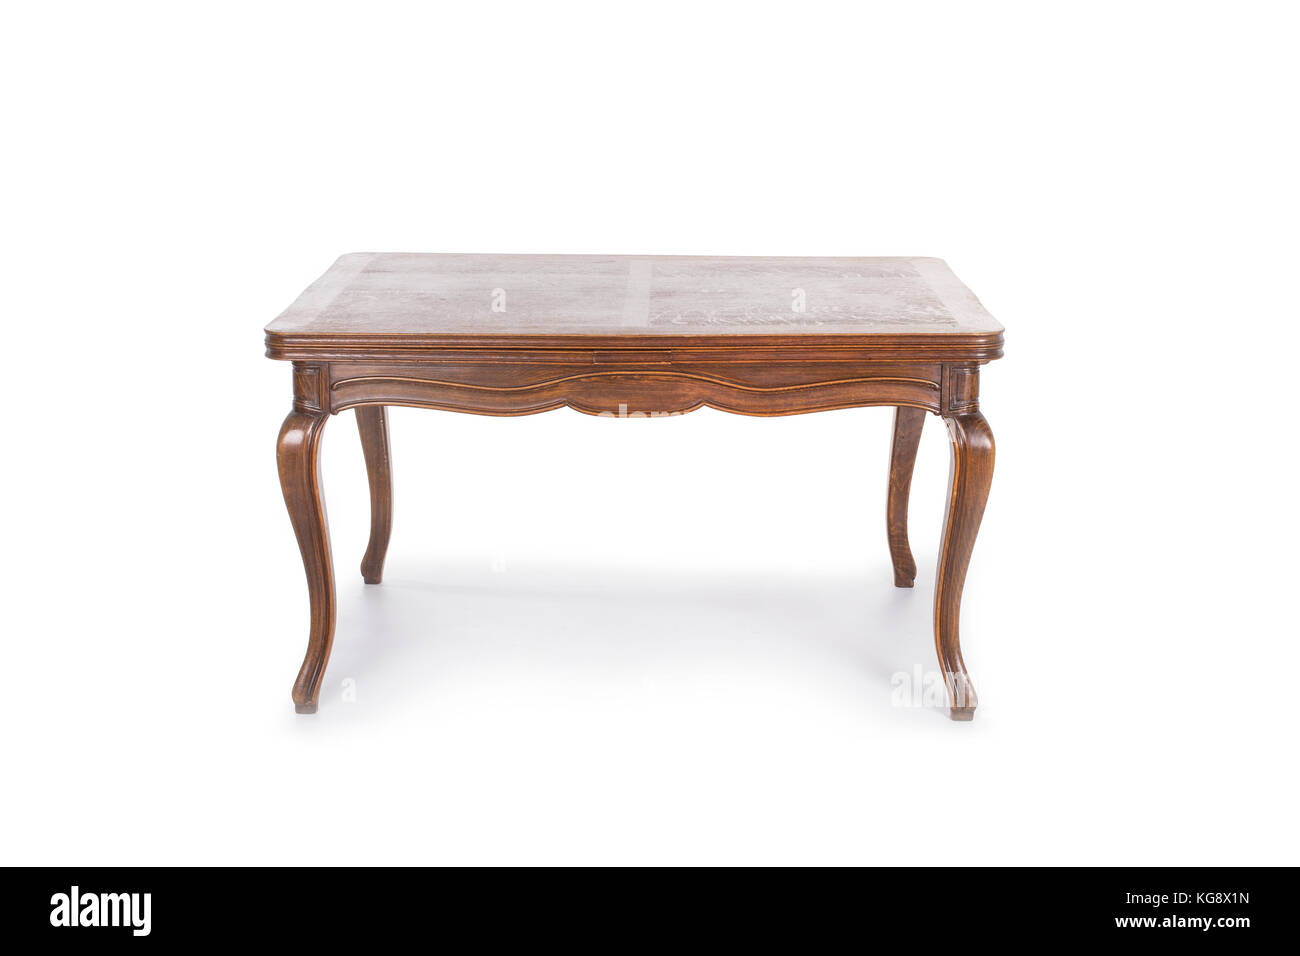 Antique home table on the white background Stock Photo